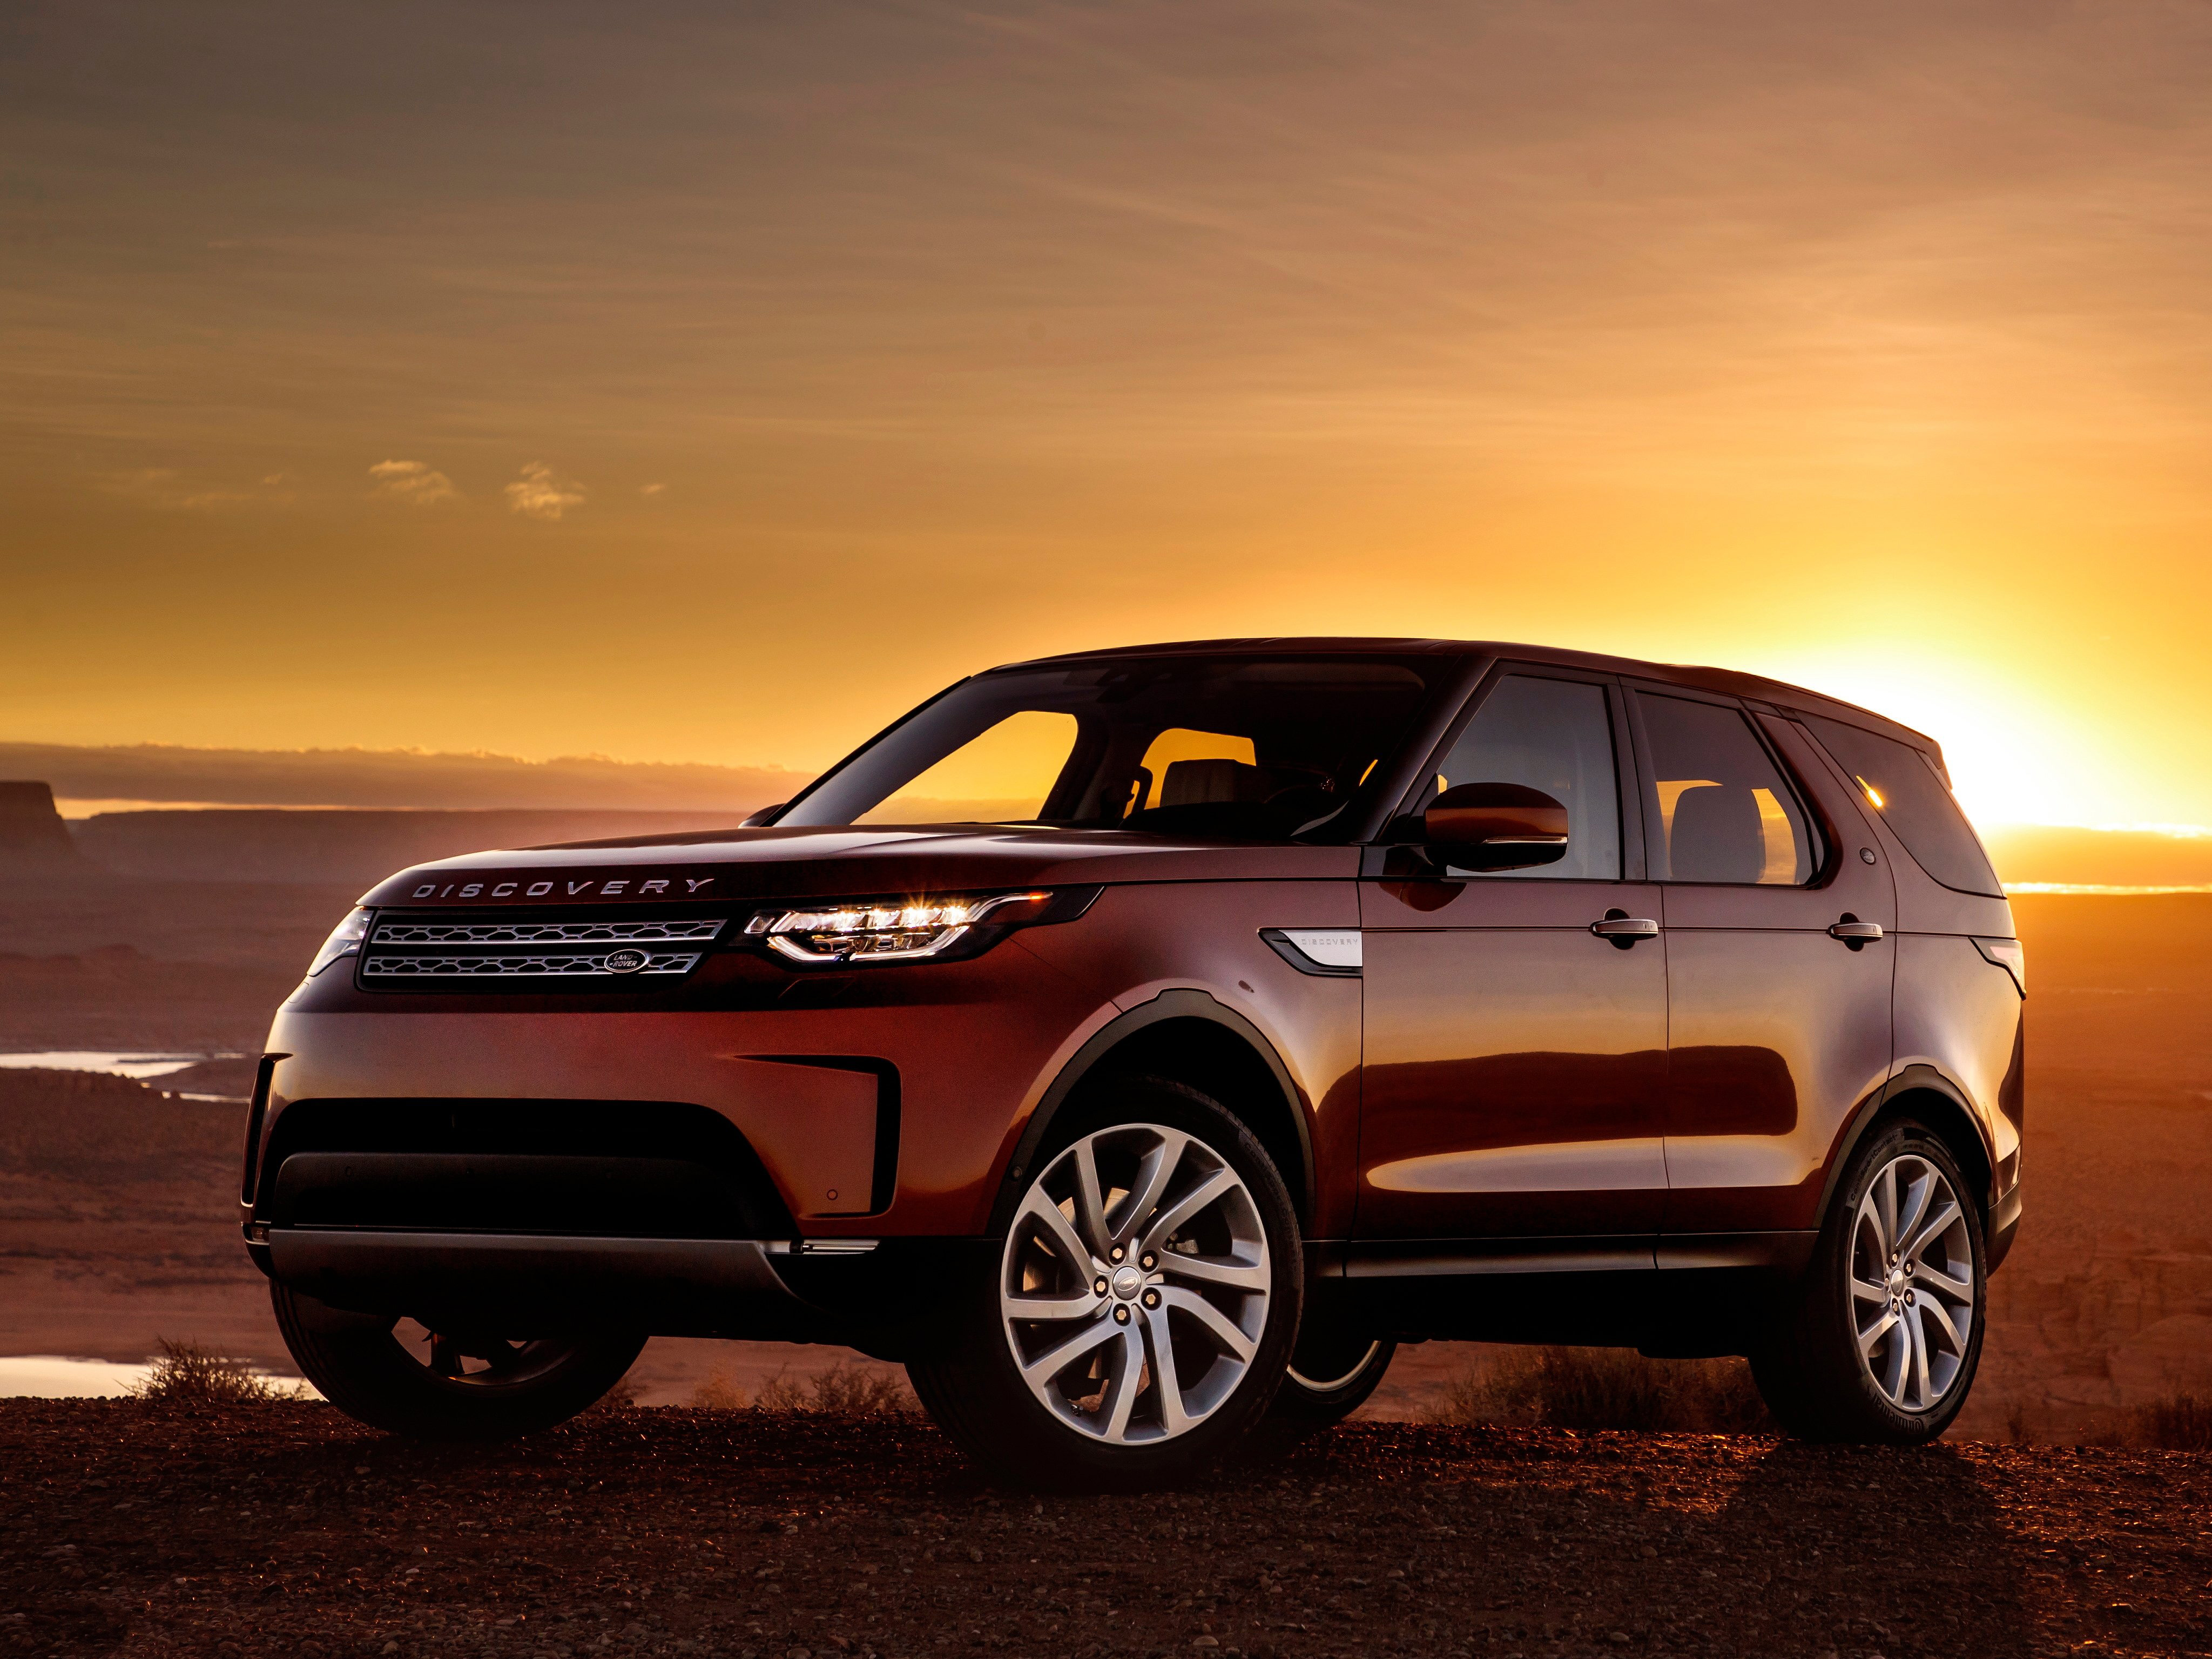 2017 Land Rover Discovery, HD Cars, 4k Wallpapers, Images, Backgrounds,  Photos and Pictures